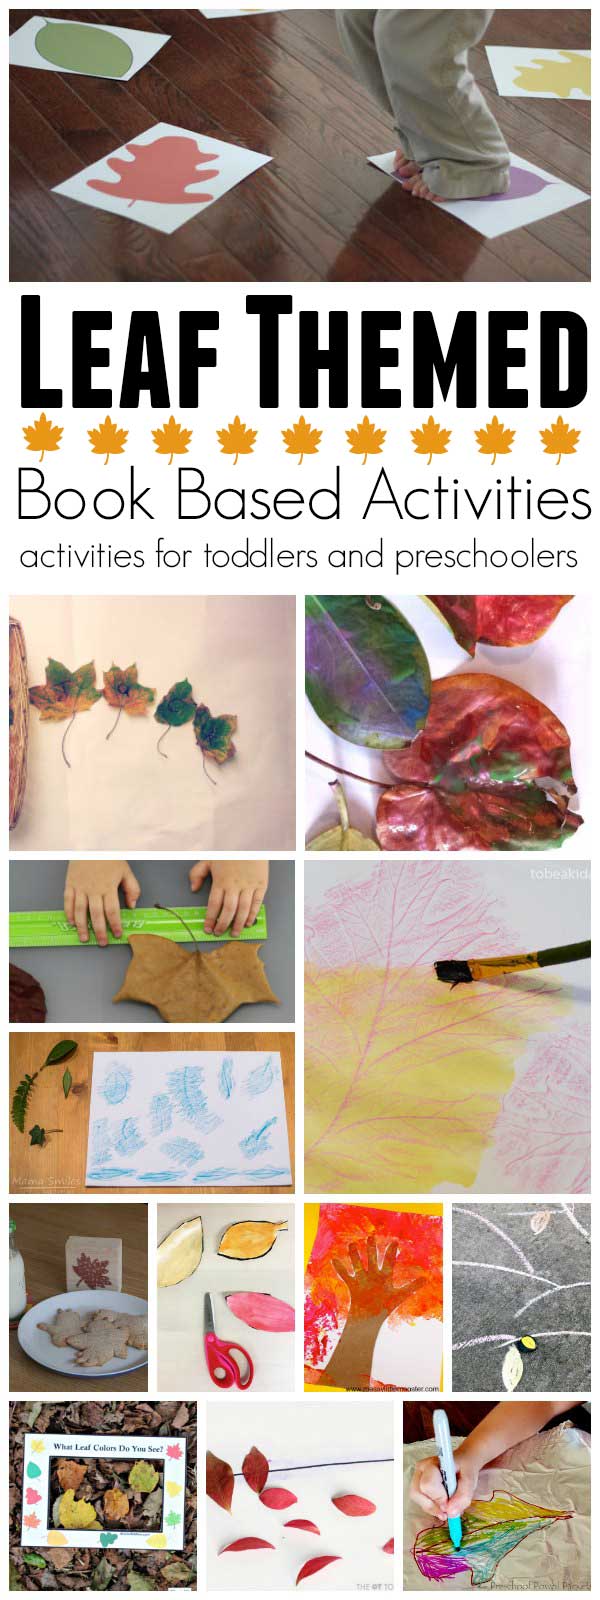 Leaf Themed Activities and Ideas for Book Based Fun aimed at Toddlers and Preschoolers and featuring Red Leaf, Yellow Leaf by Lois Ehlert.